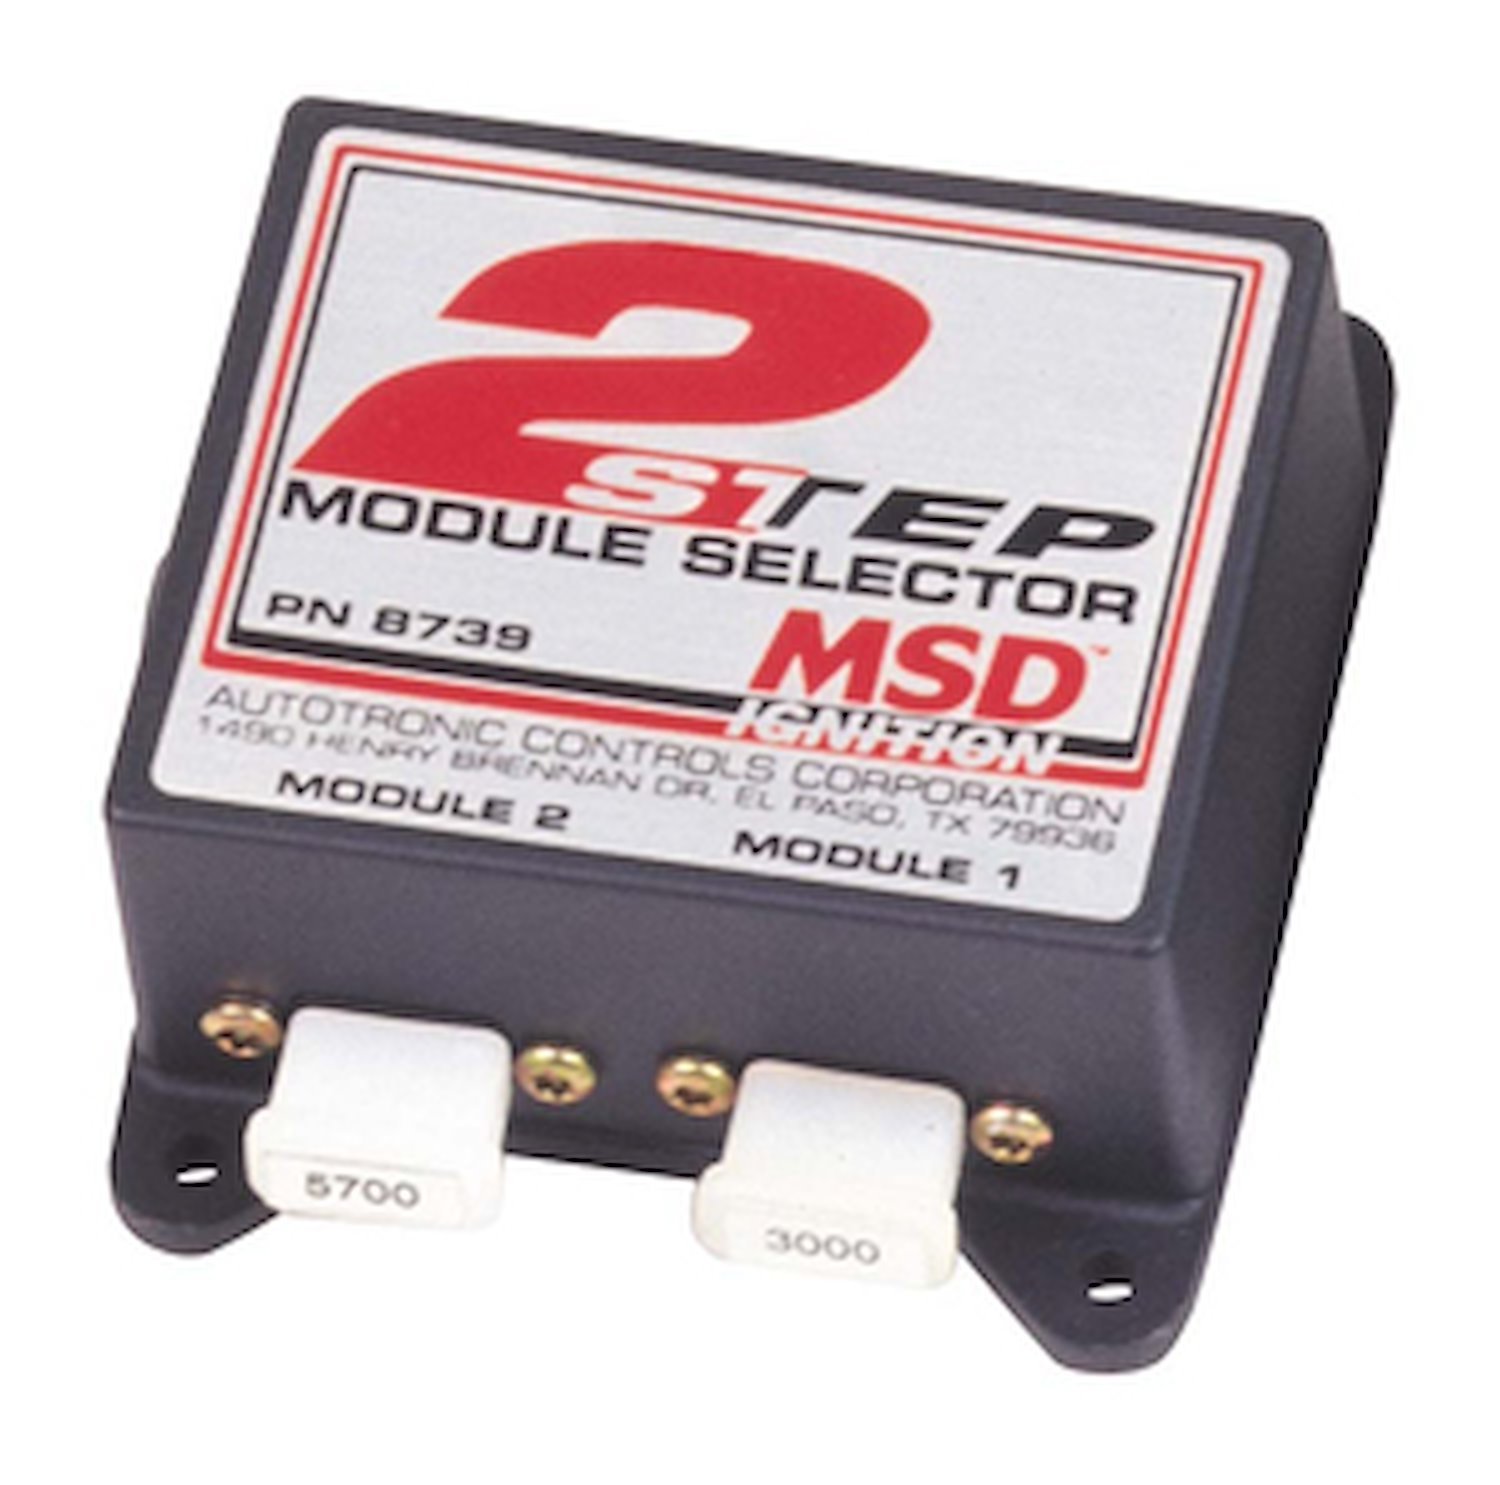 8739 Module Selector 2-Step for use w/MSD Soft Touch Rev Control or Timing Control Unit